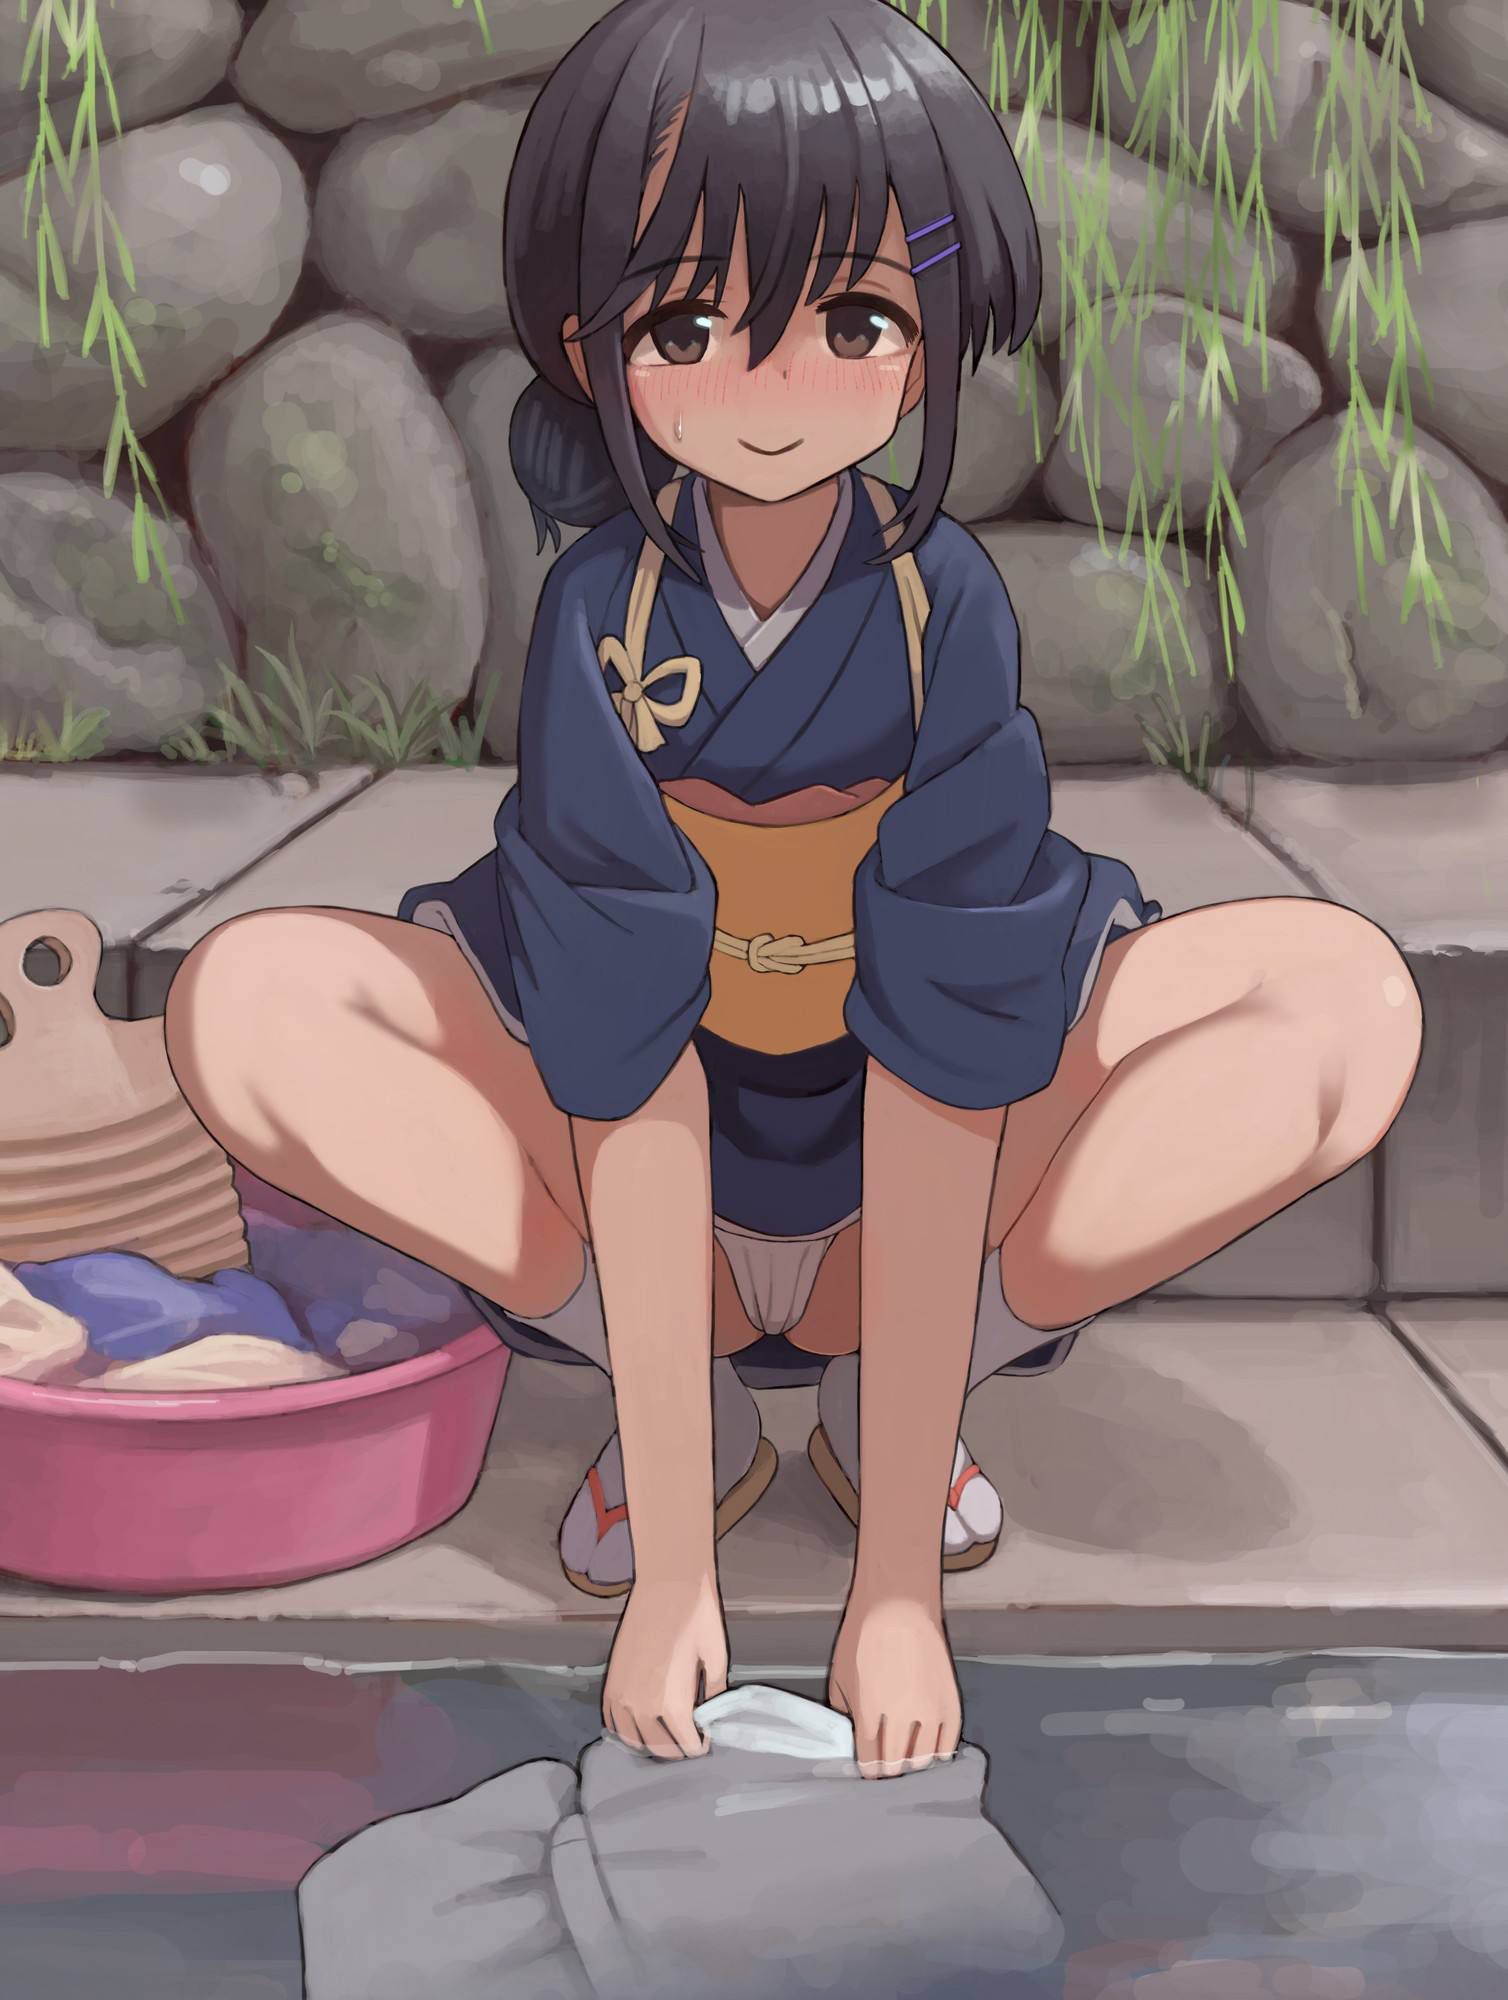 "Where are you looking~?" A soft-looking defenseless crotch image ♪ of a girl squatting with her eyes 47